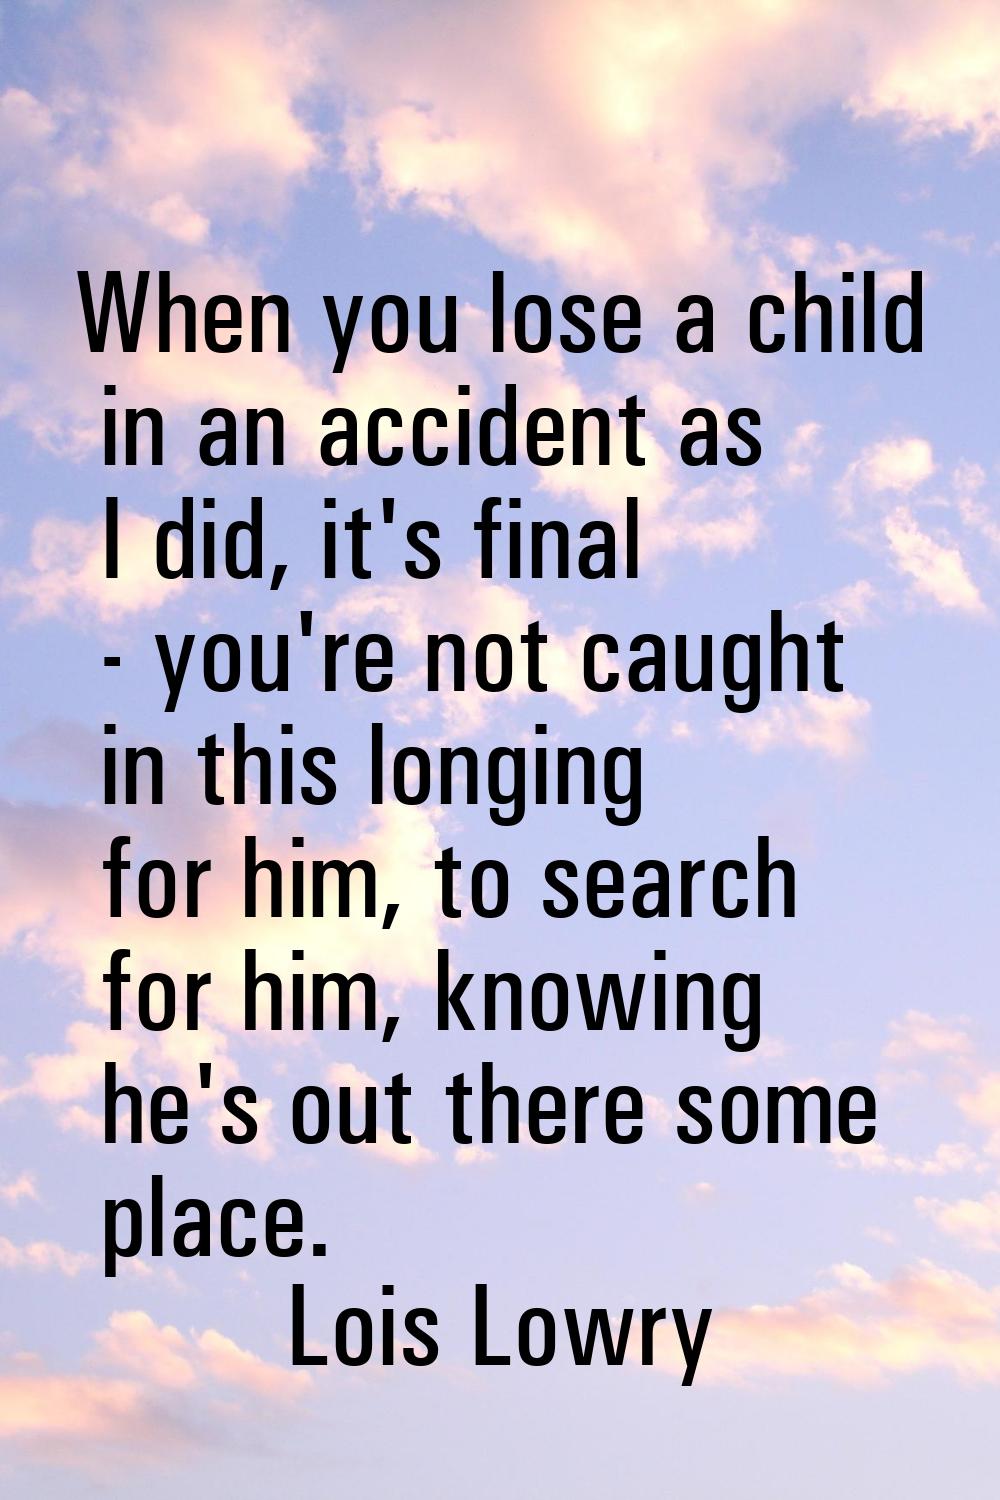 When you lose a child in an accident as I did, it's final - you're not caught in this longing for h